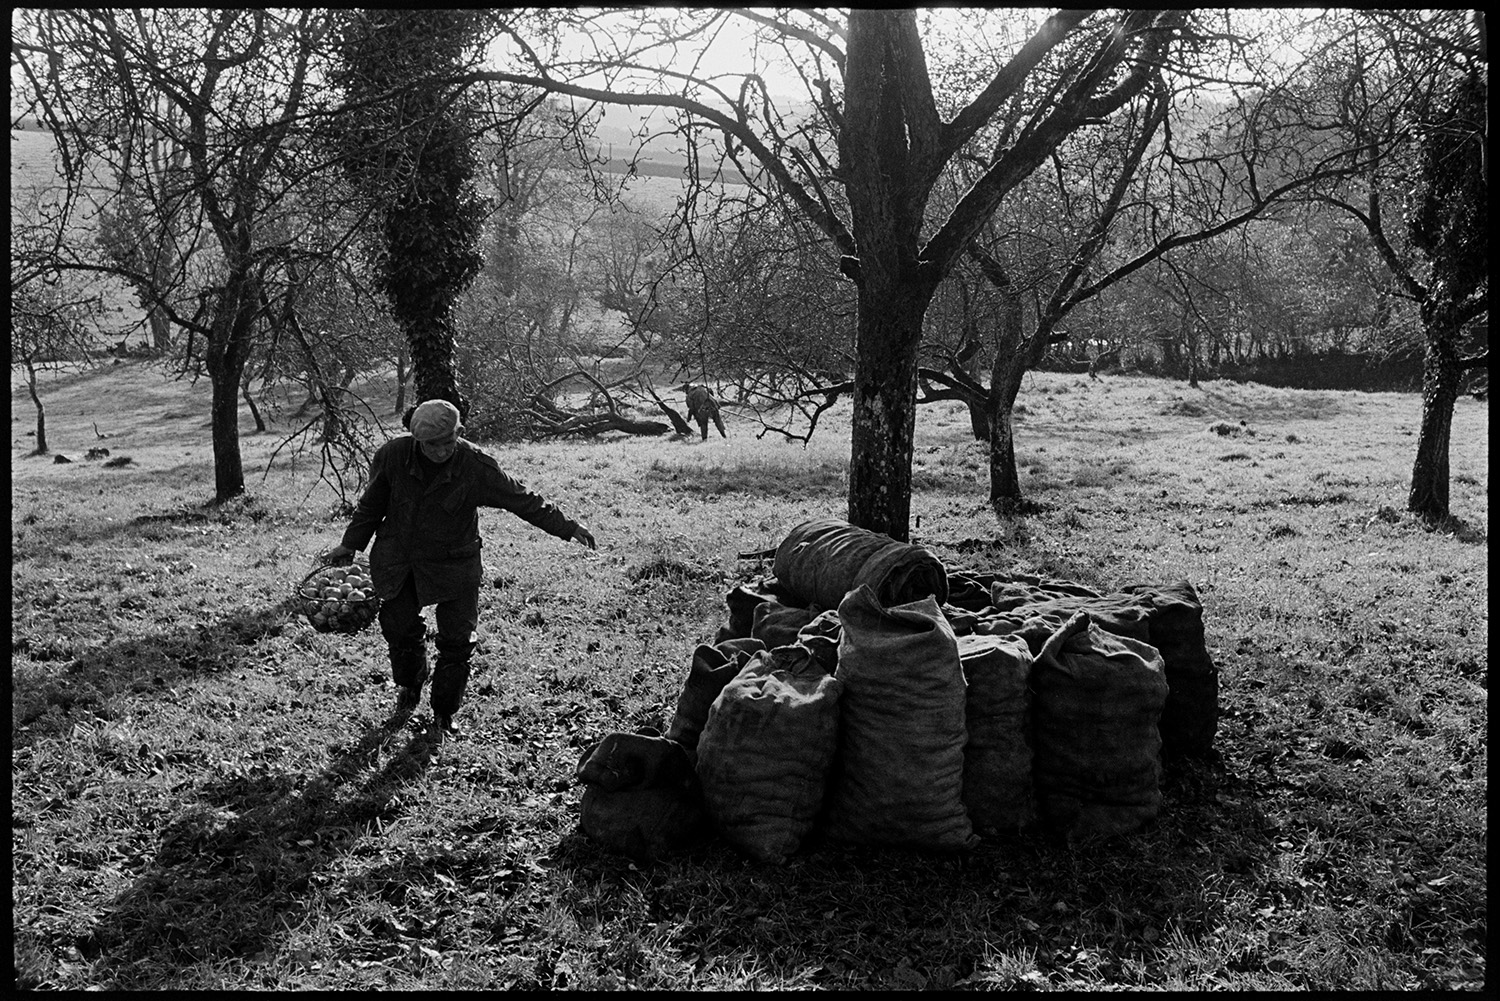 Cider orchard, men picking up apples and bagging them up. Fallen apple tree.
[Men picking up apples in a cider orchard at Westpark, Iddesleigh. Full sacks stacked around a tree,. Bill Lott is carrying a basket of apples to fill up a sack in the foreground.]